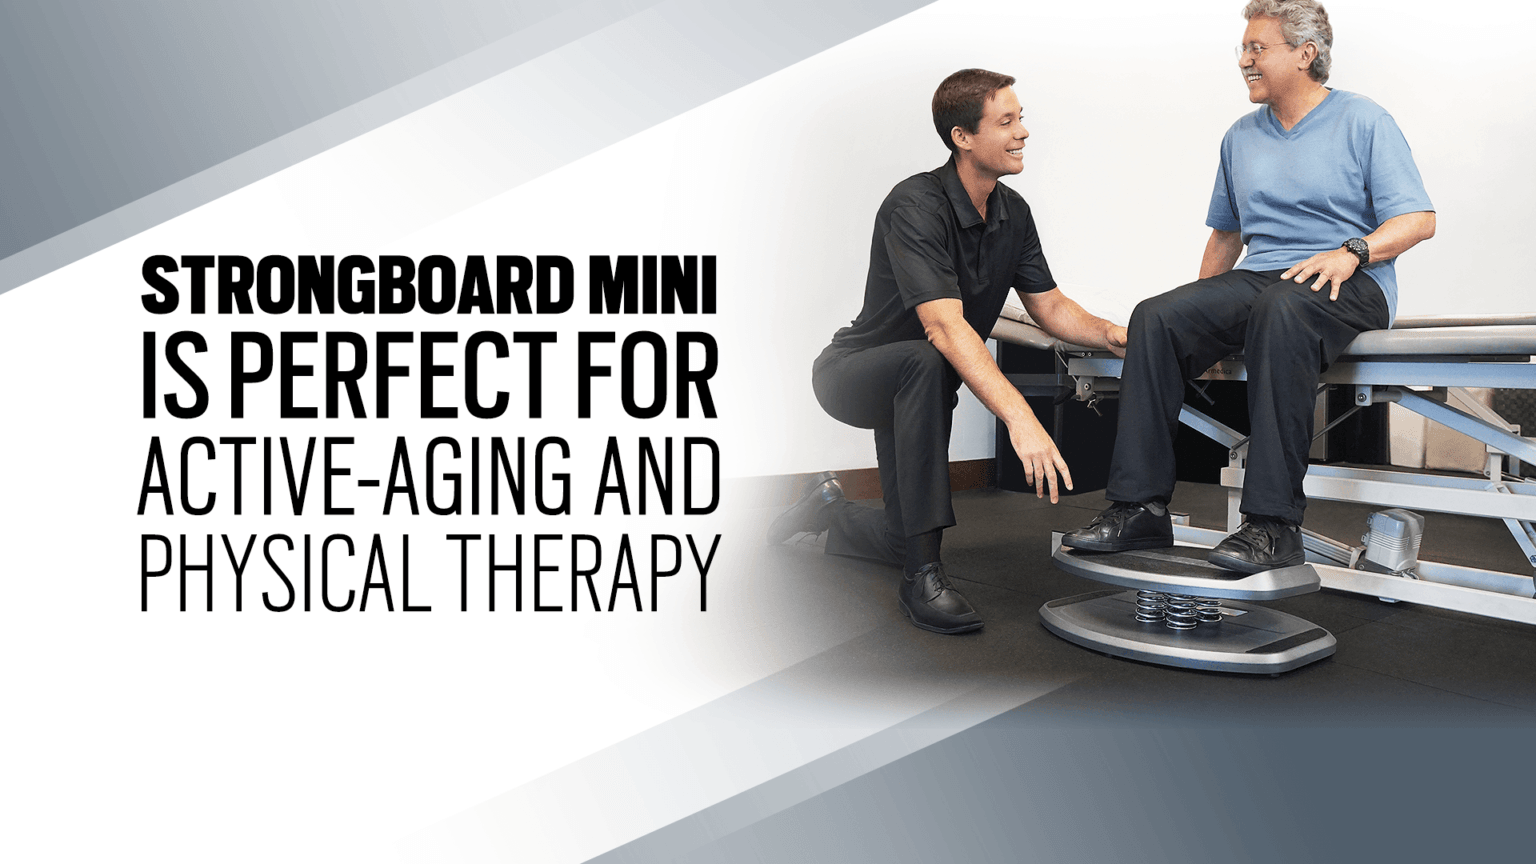 Physical therapist works with client and StrongBoard MINI